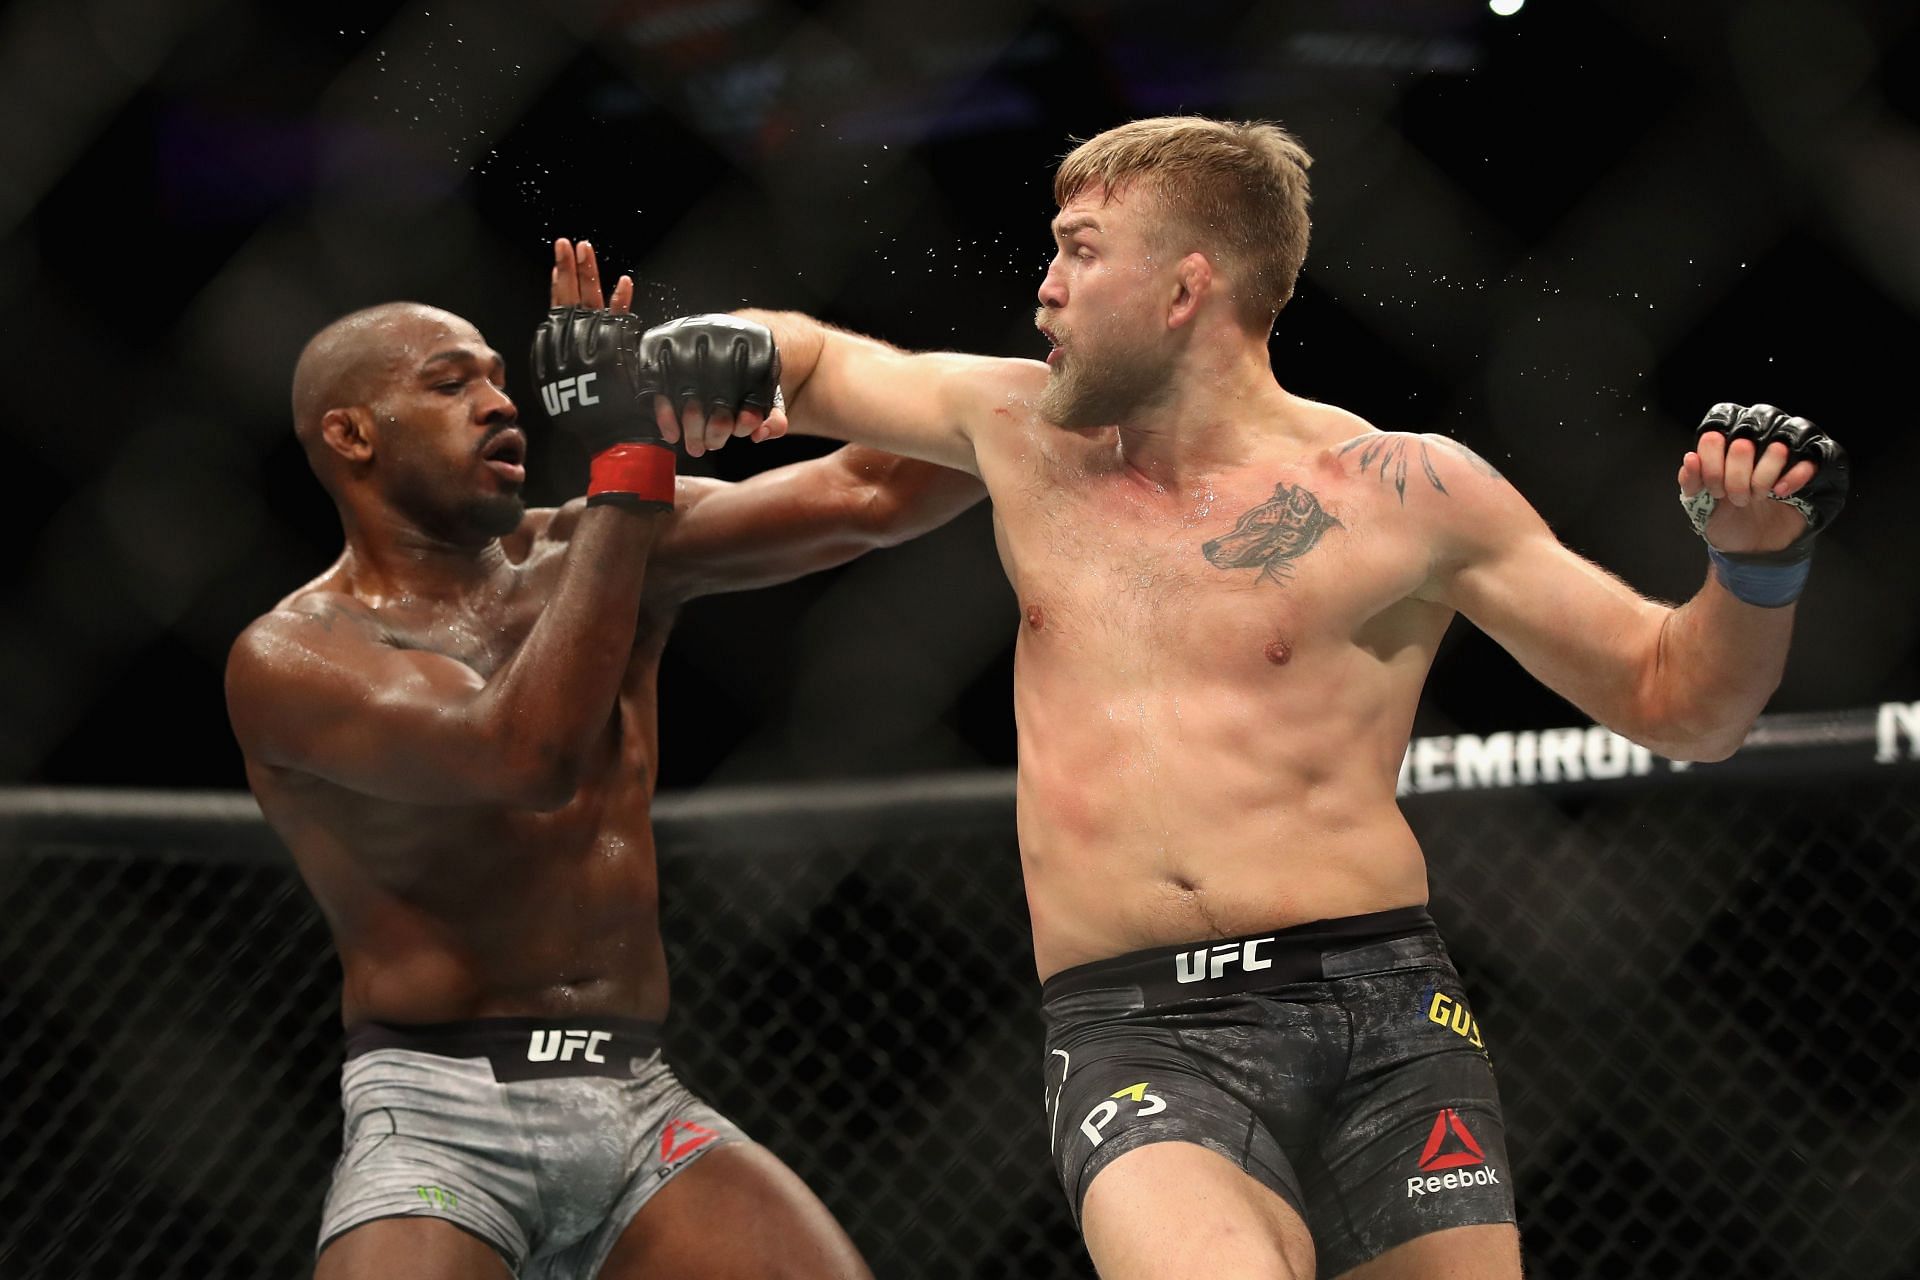 Alexander Gustafsson took the fight to Jon Jones like nobody had done before in their first bout